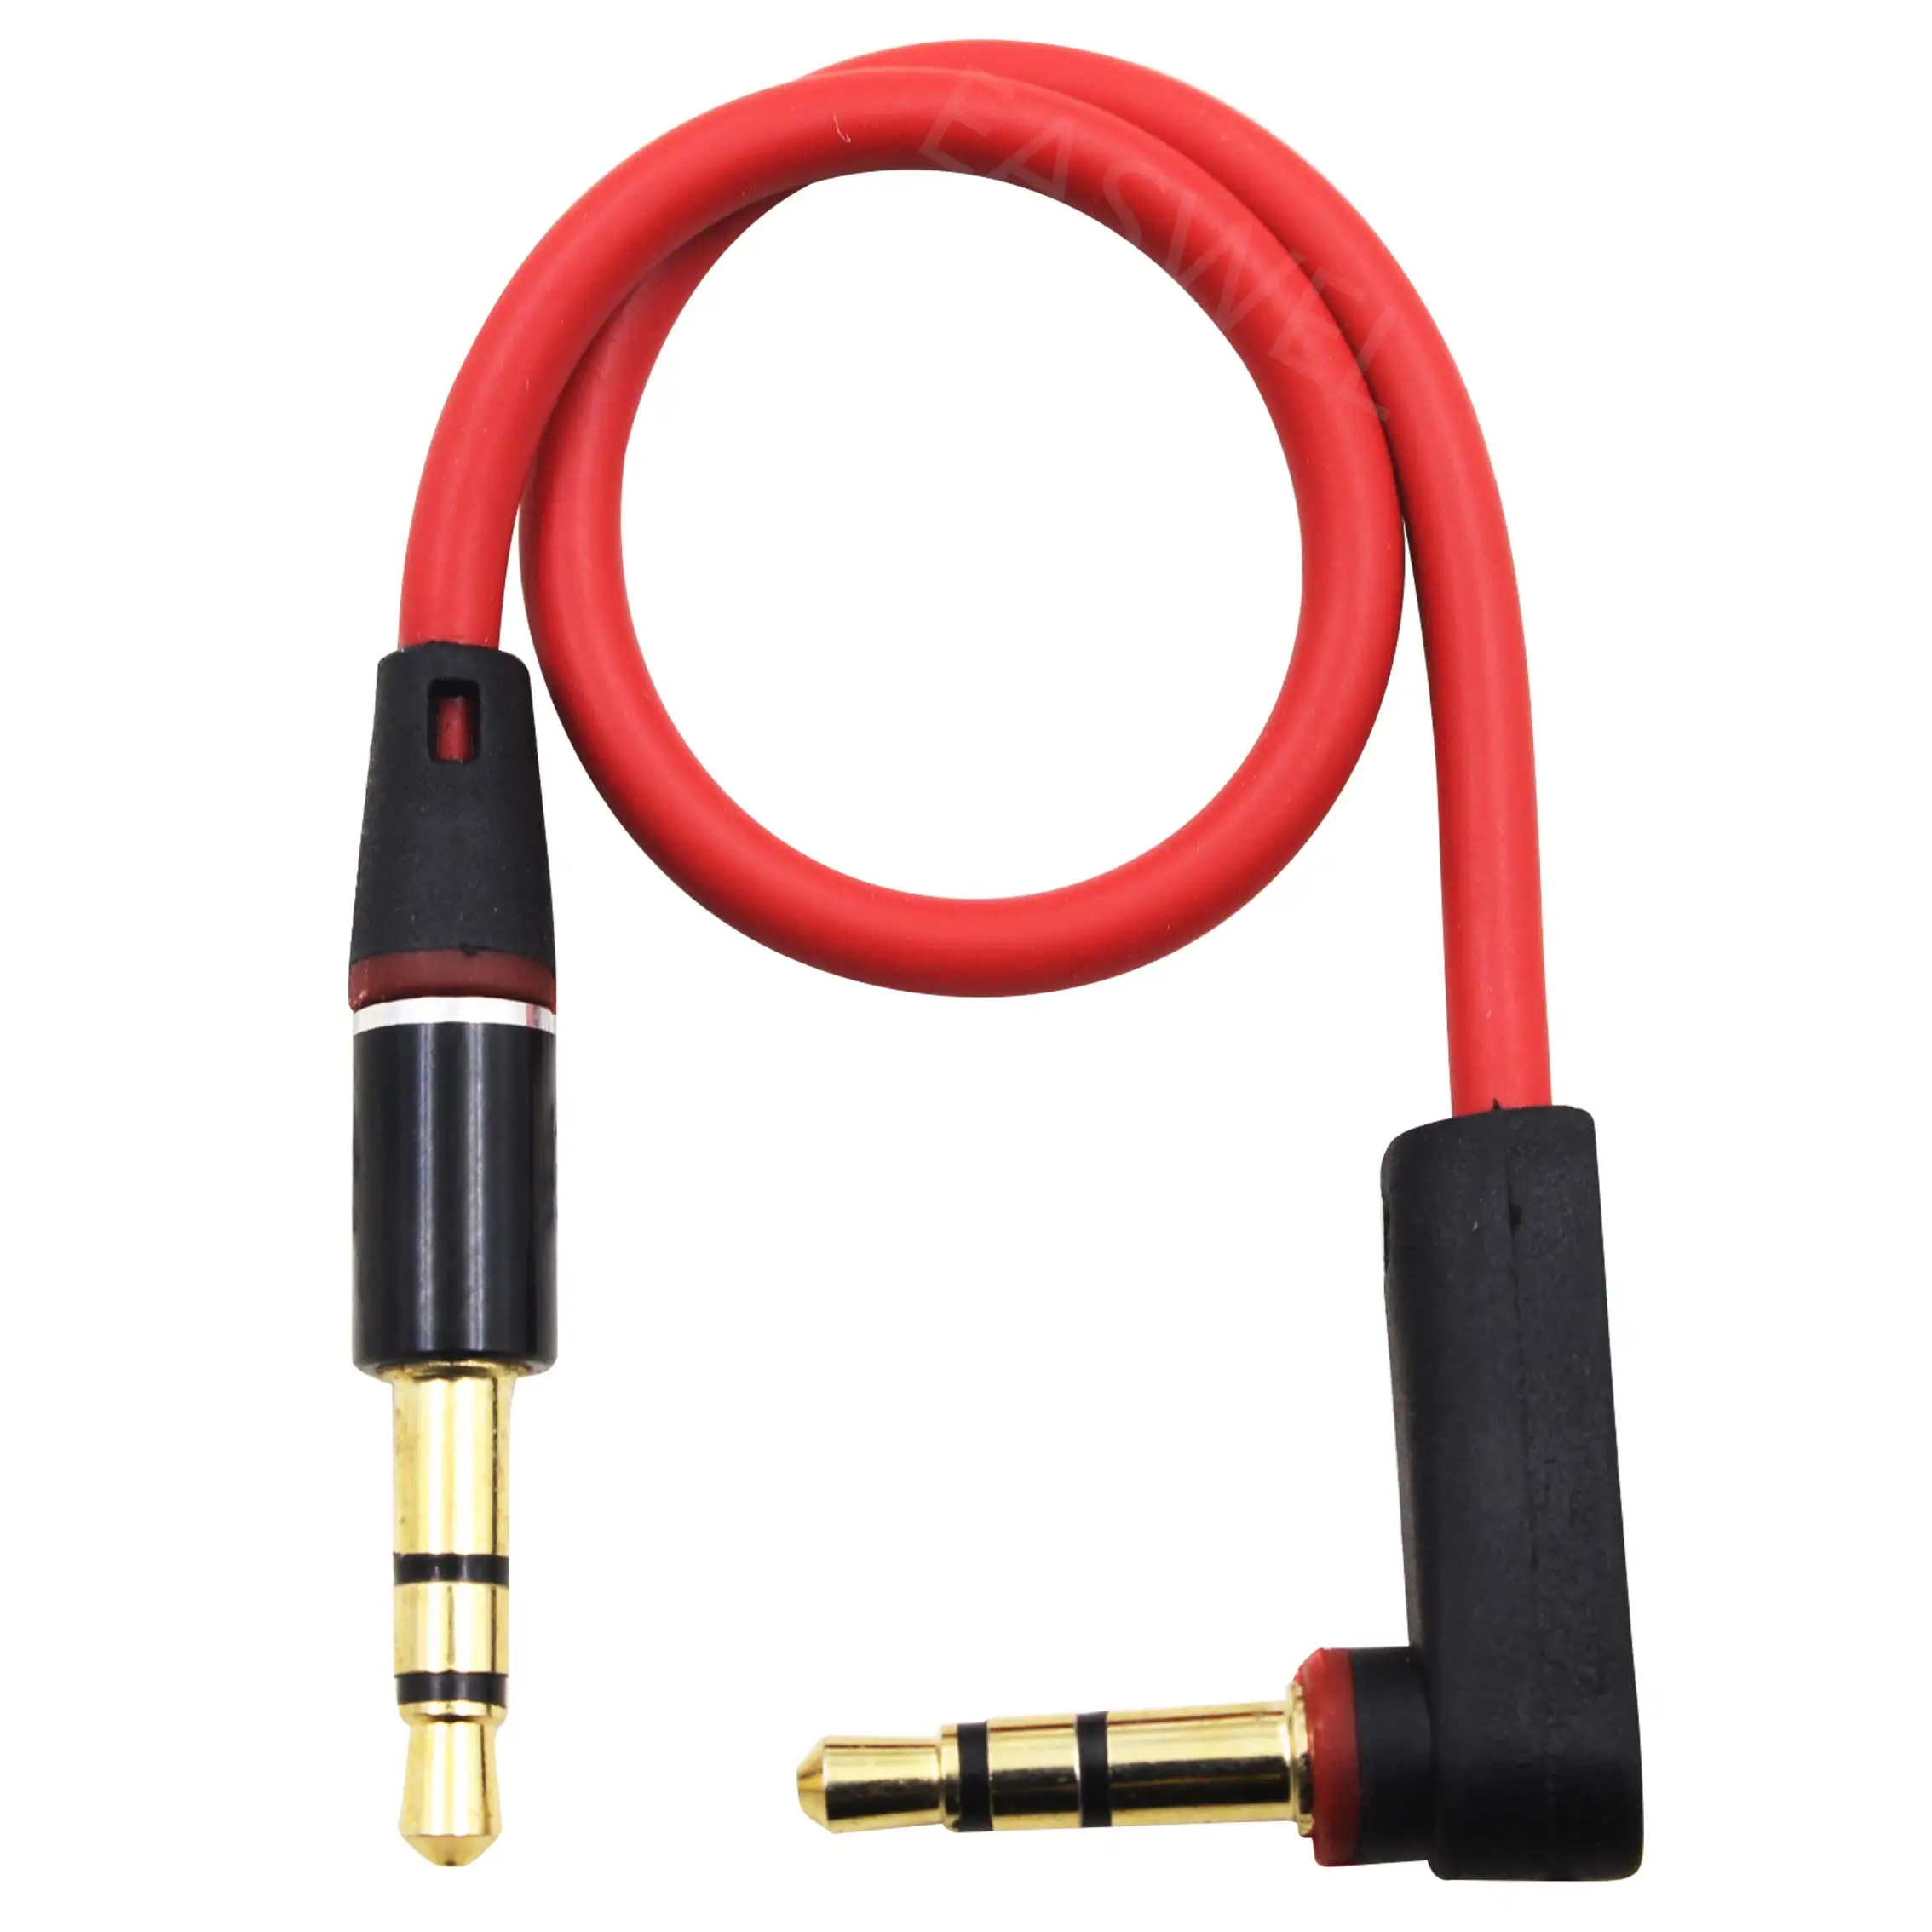 10cm Short Right Angle 3.5mm Jack to Jack Stereo Audio Aux Cable Male to Male 